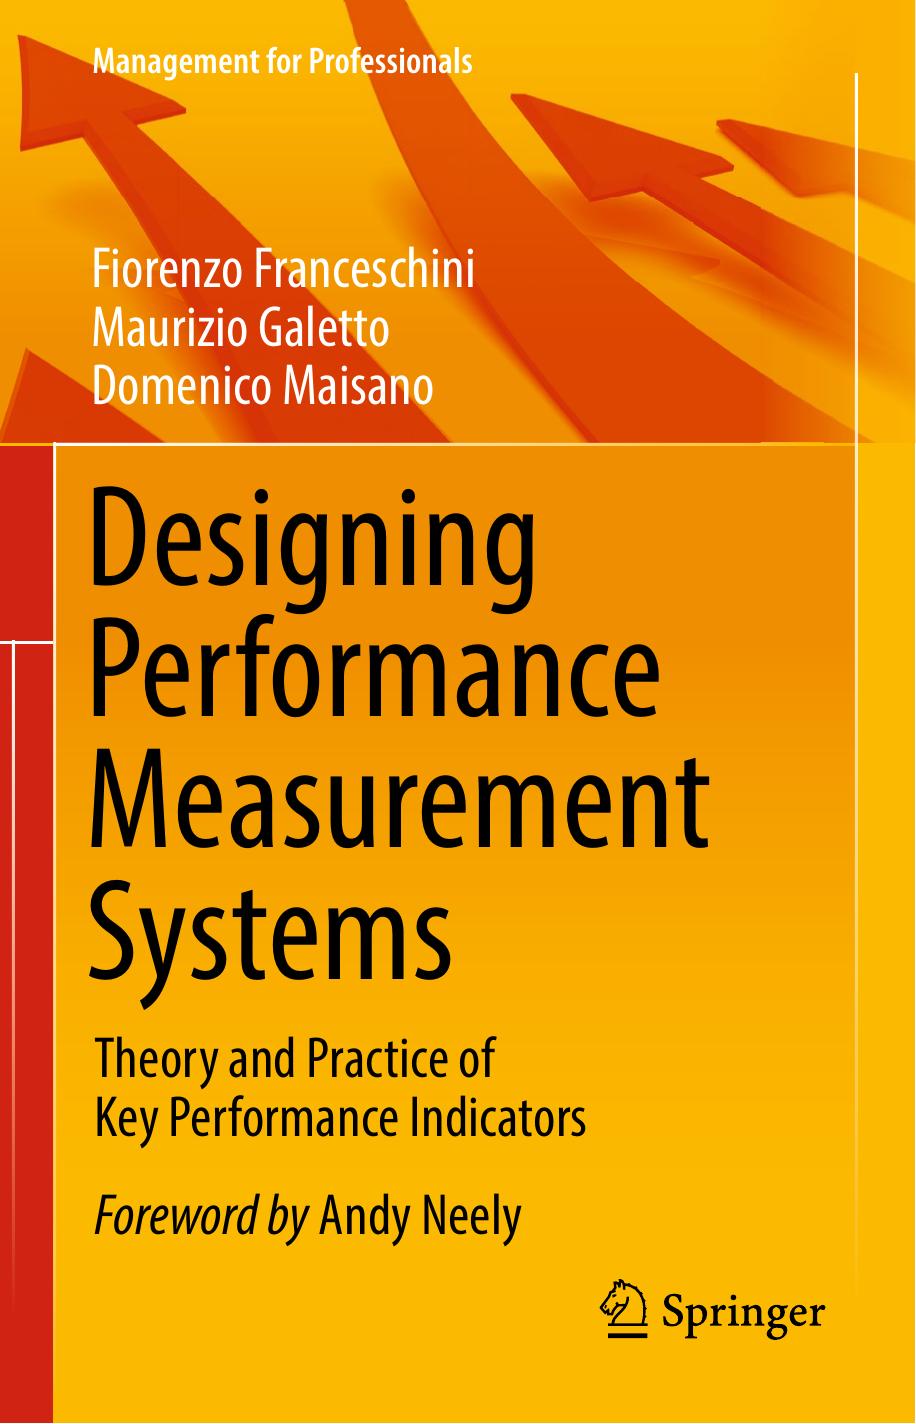 Designing Performance Measurement Systems  Theory and Practice of Key Performance Indicators ( PDFDrive ) 2019